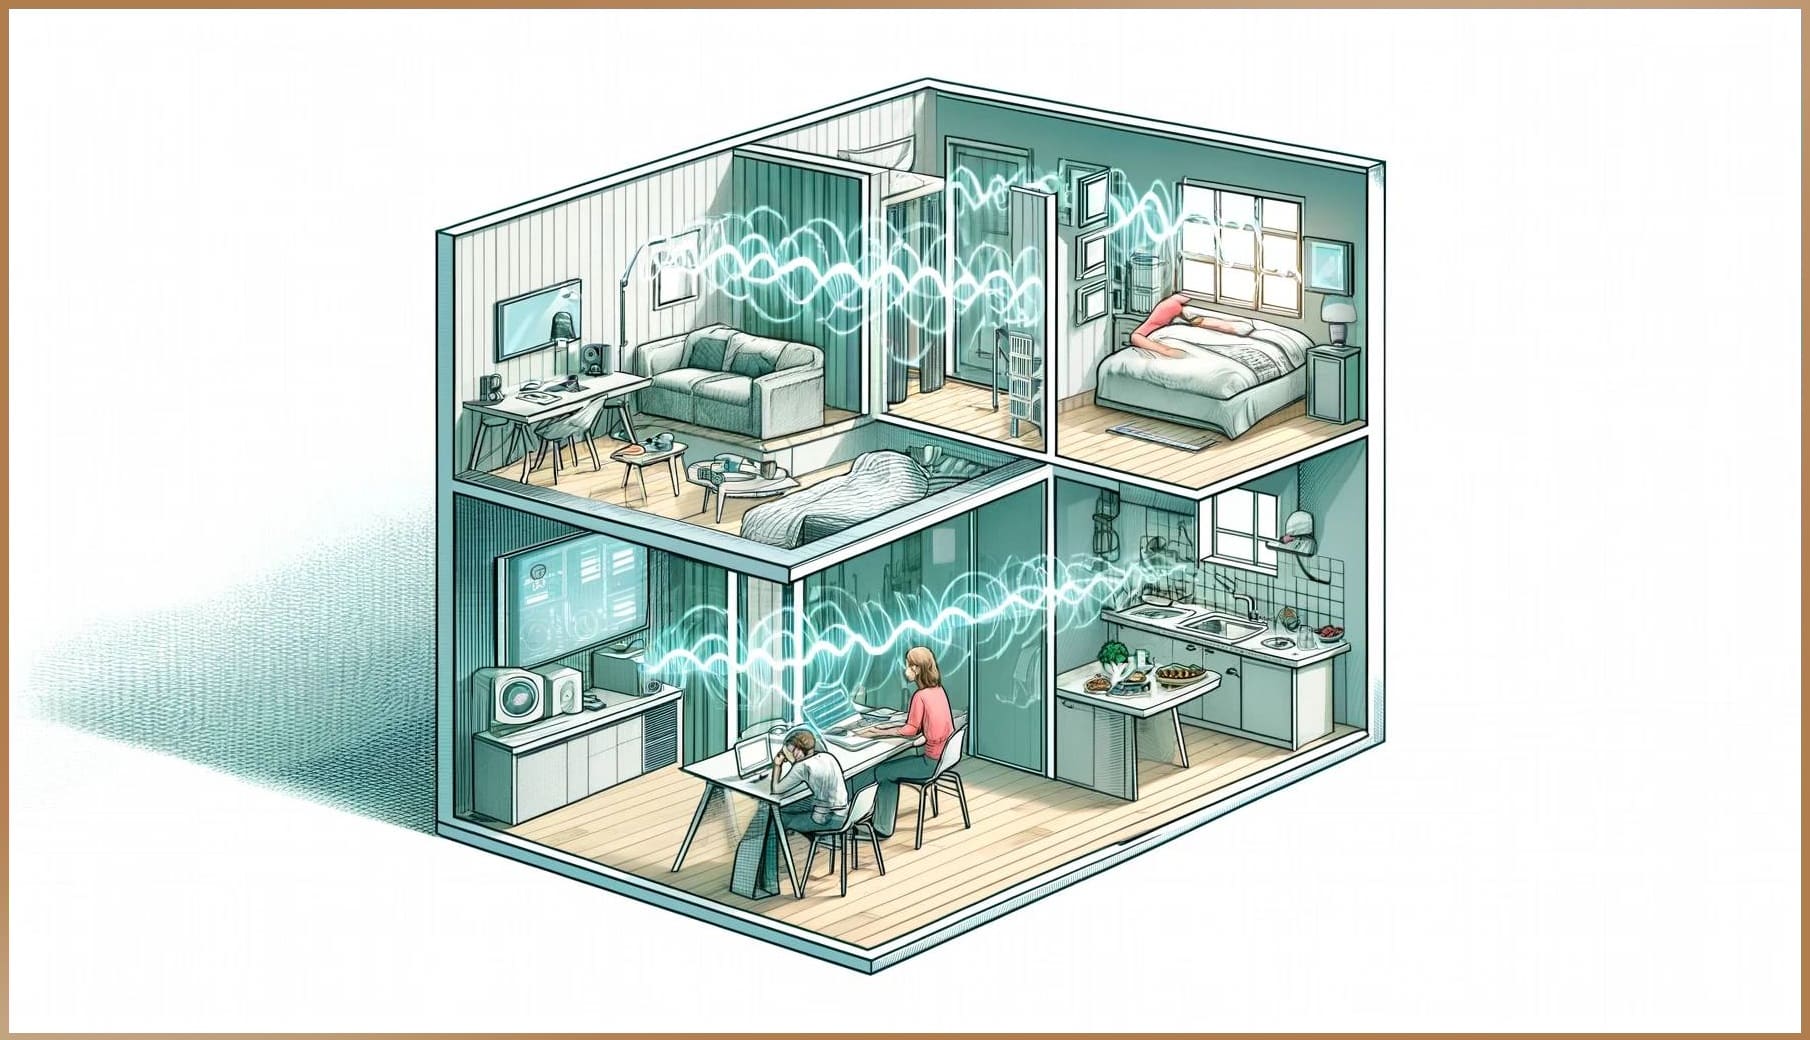 Cross-section view of a home showing visible electromagnetic waves from electronic devices around individuals engaged in daily activities, representing the constant presence of electrosmog.